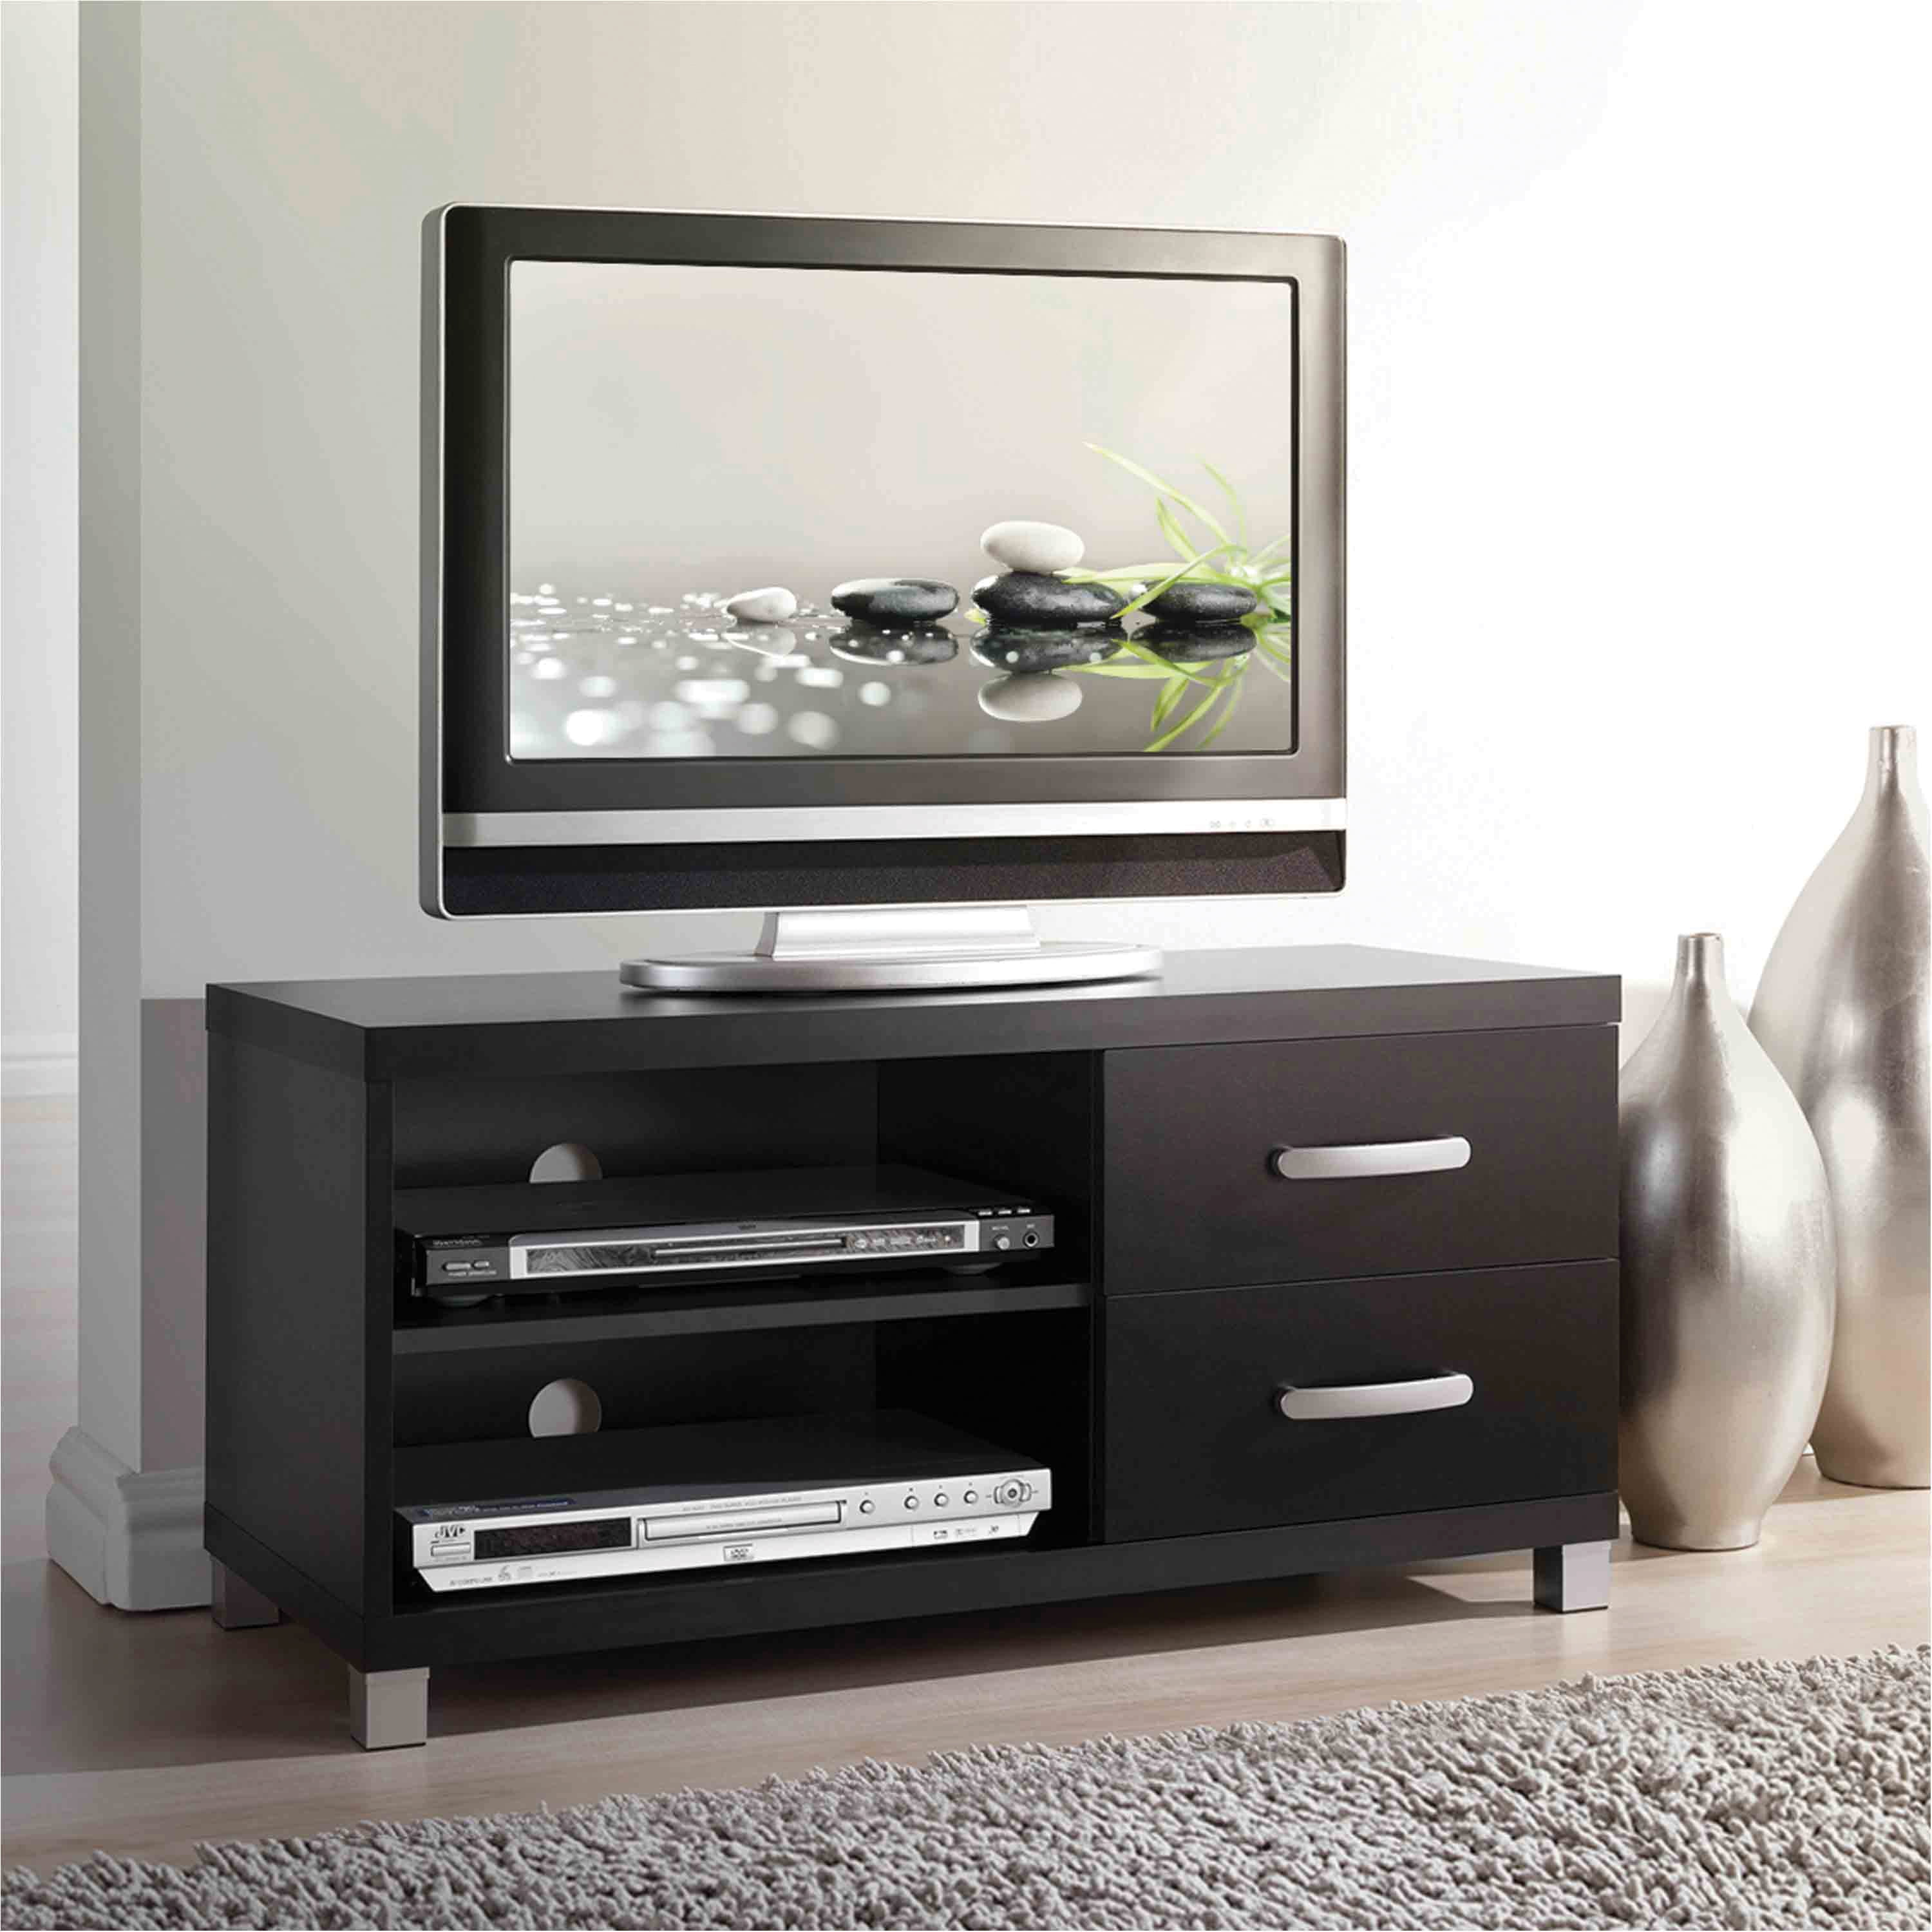 TV Stand for TVs up to 42 Espresso Dimension: 47.24 x 15.75 x 19.09 Inches White Mainstay.